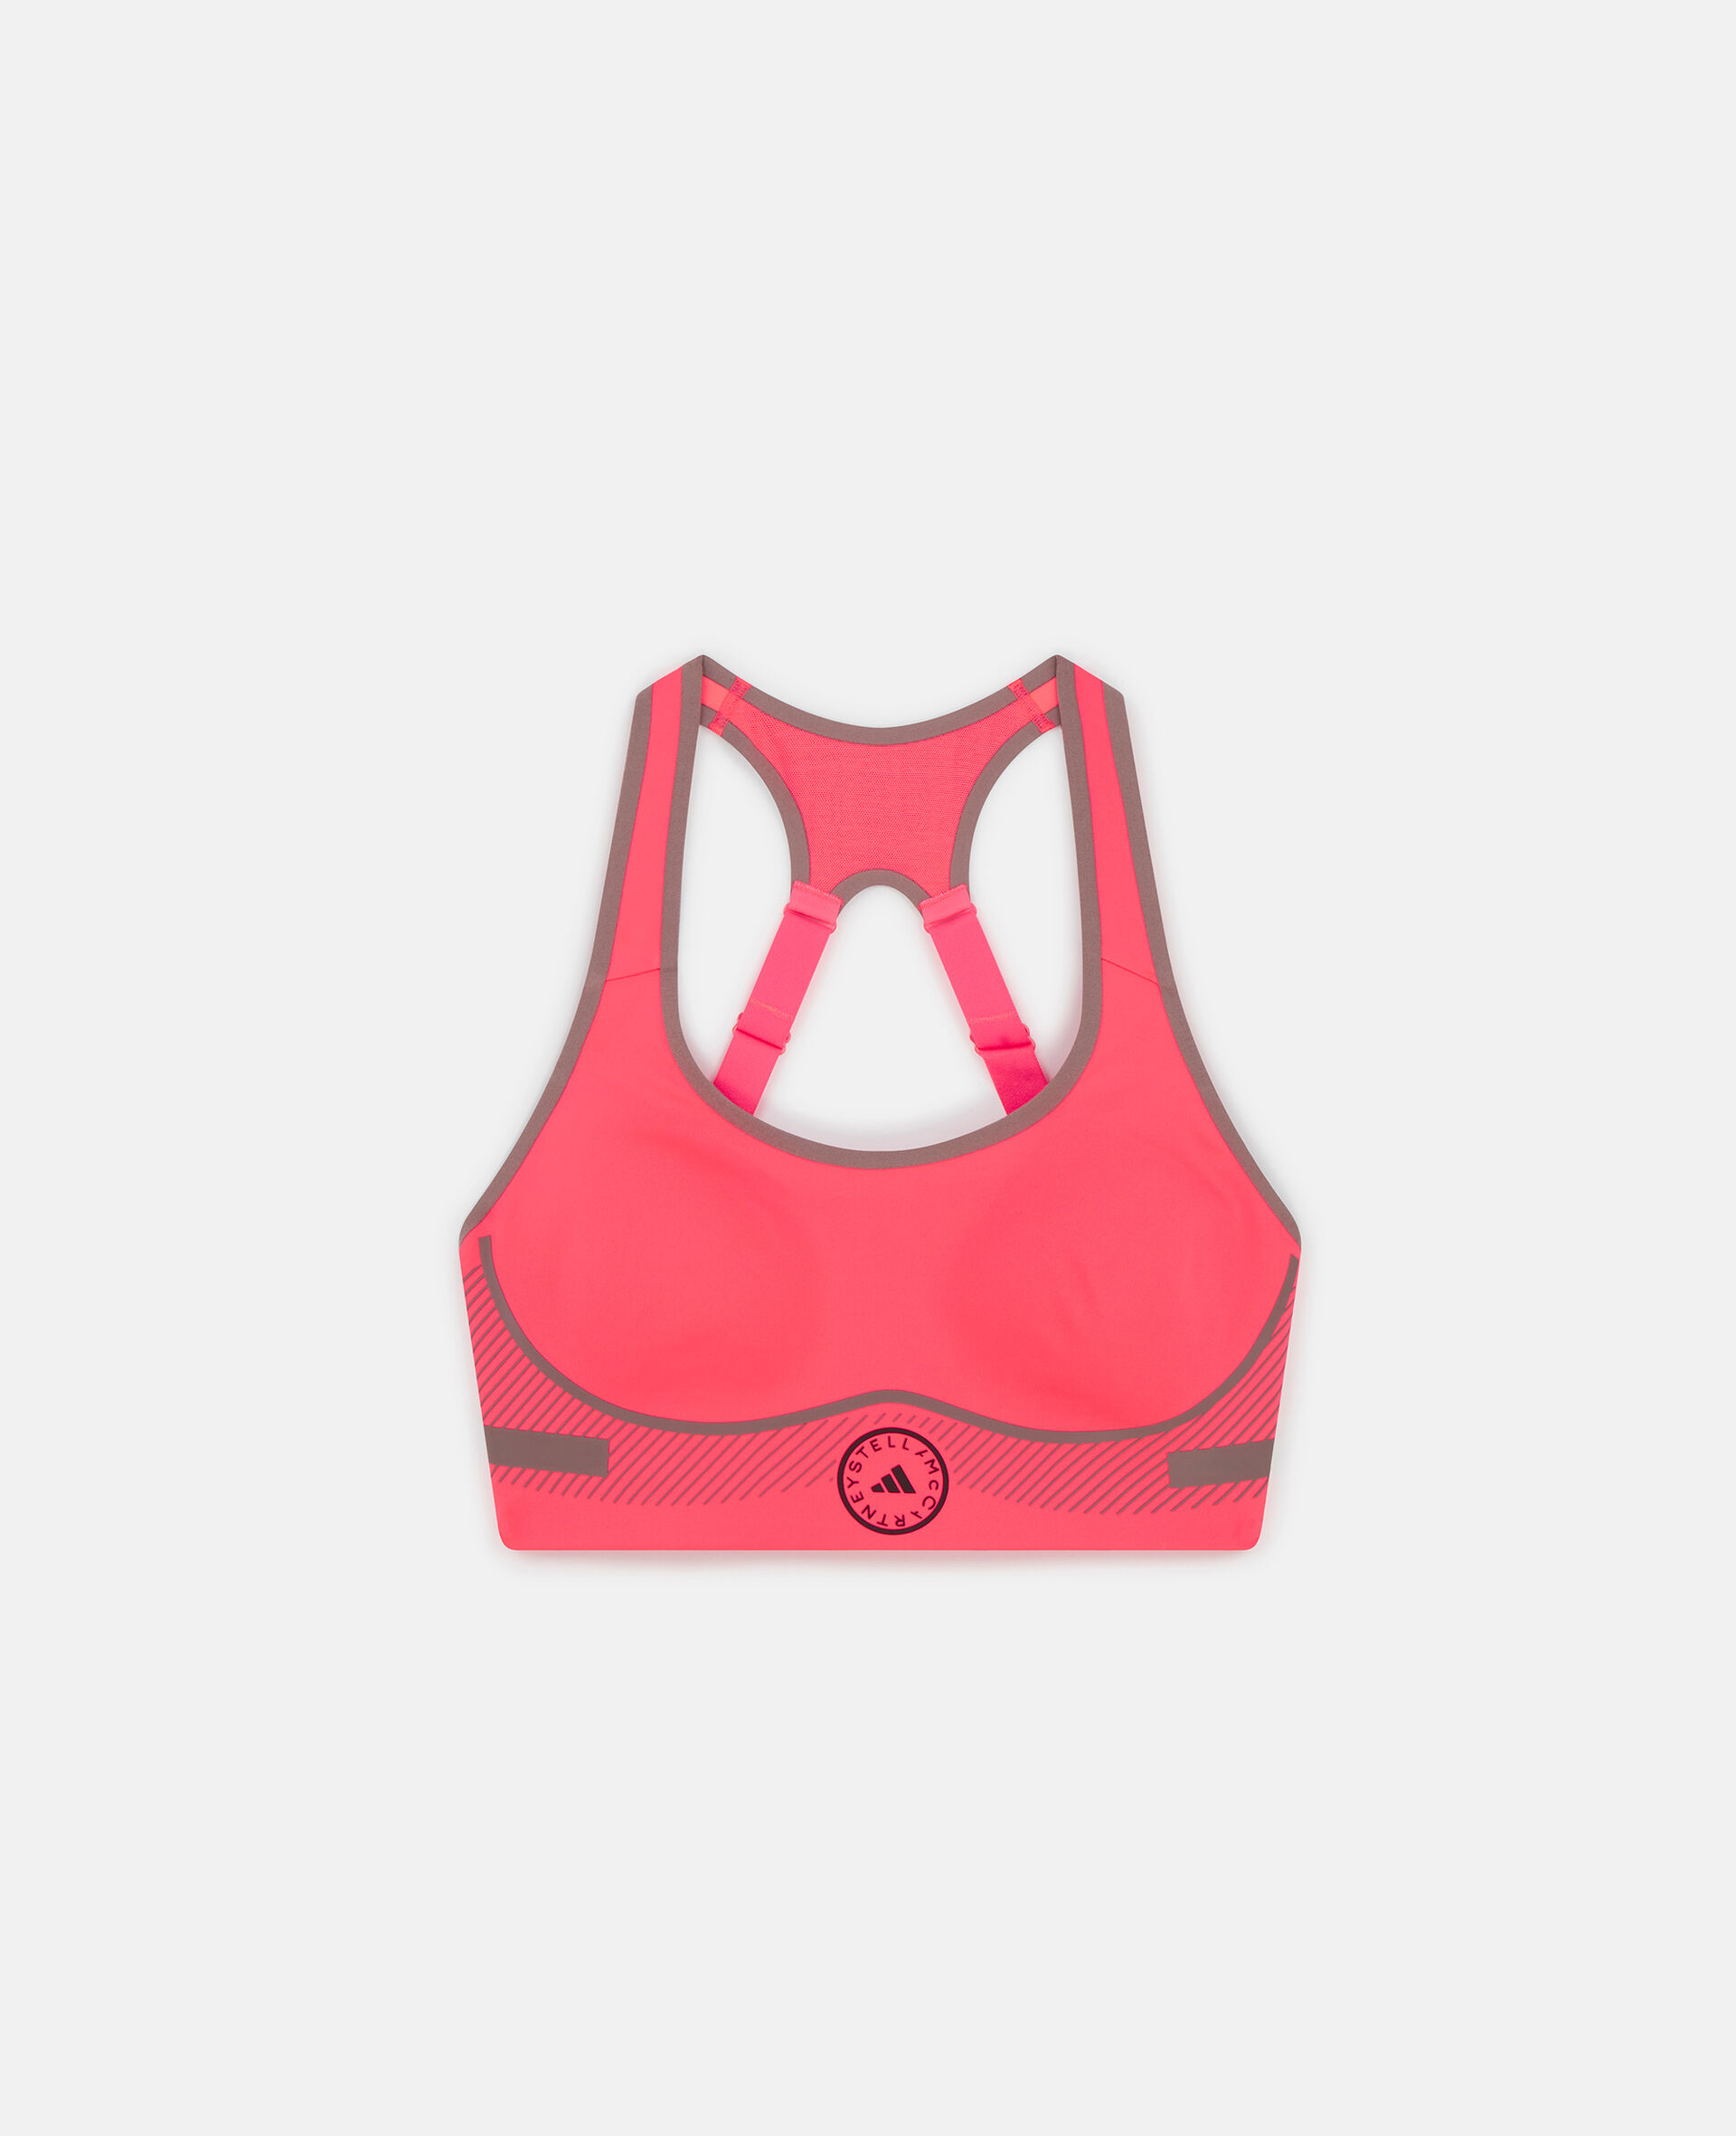 TruePace High Impact Sports Bra-Pink-large image number 0